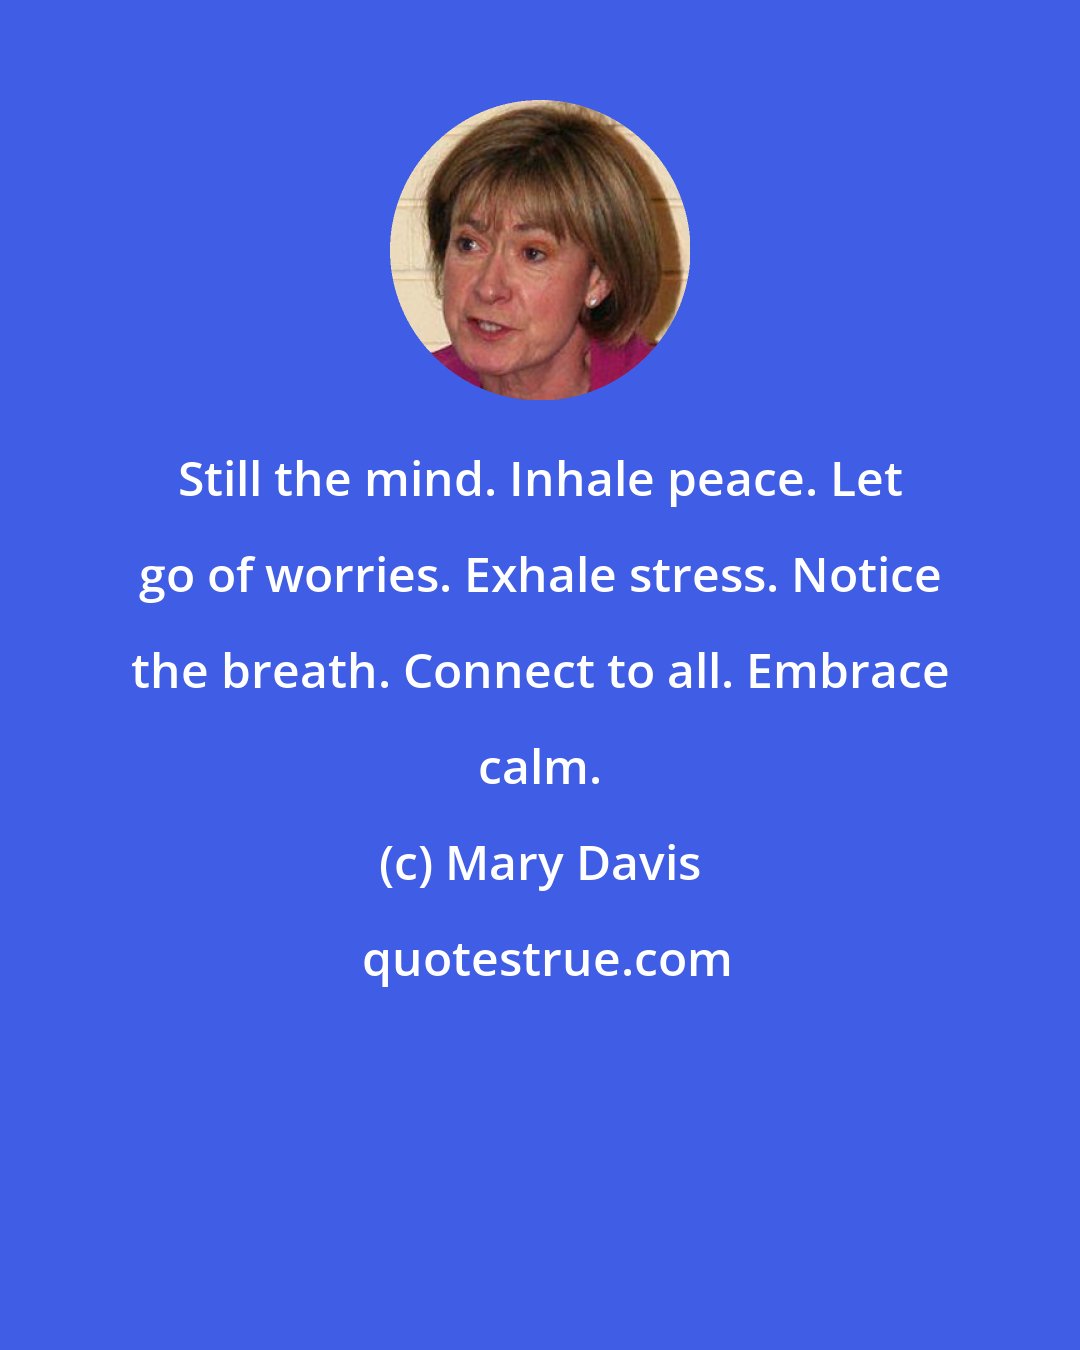 Mary Davis: Still the mind. Inhale peace. Let go of worries. Exhale stress. Notice the breath. Connect to all. Embrace calm.